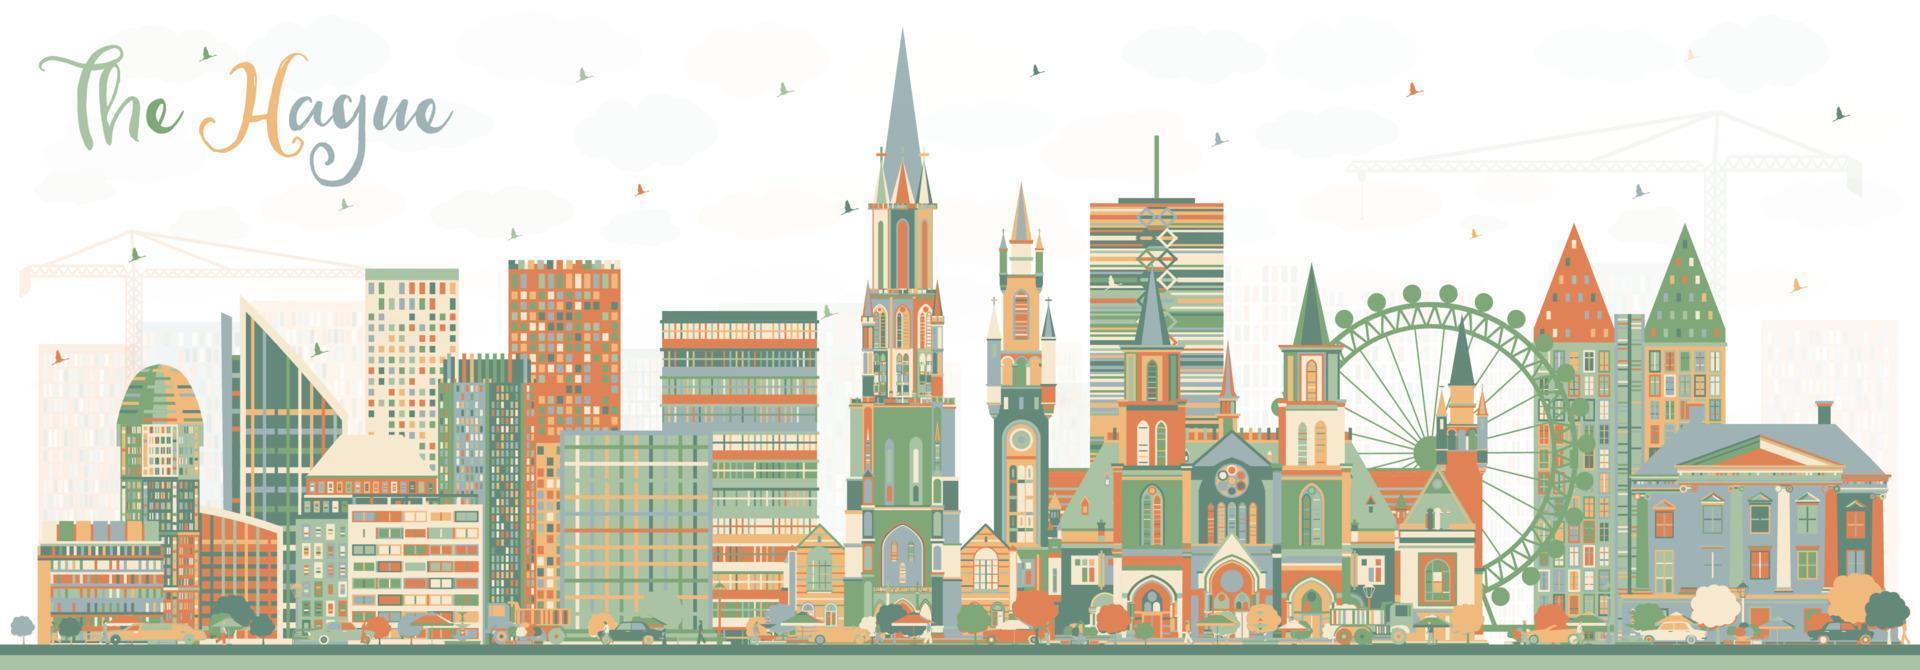 The Hague Netherlands City Skyline with Color Buildings. vector